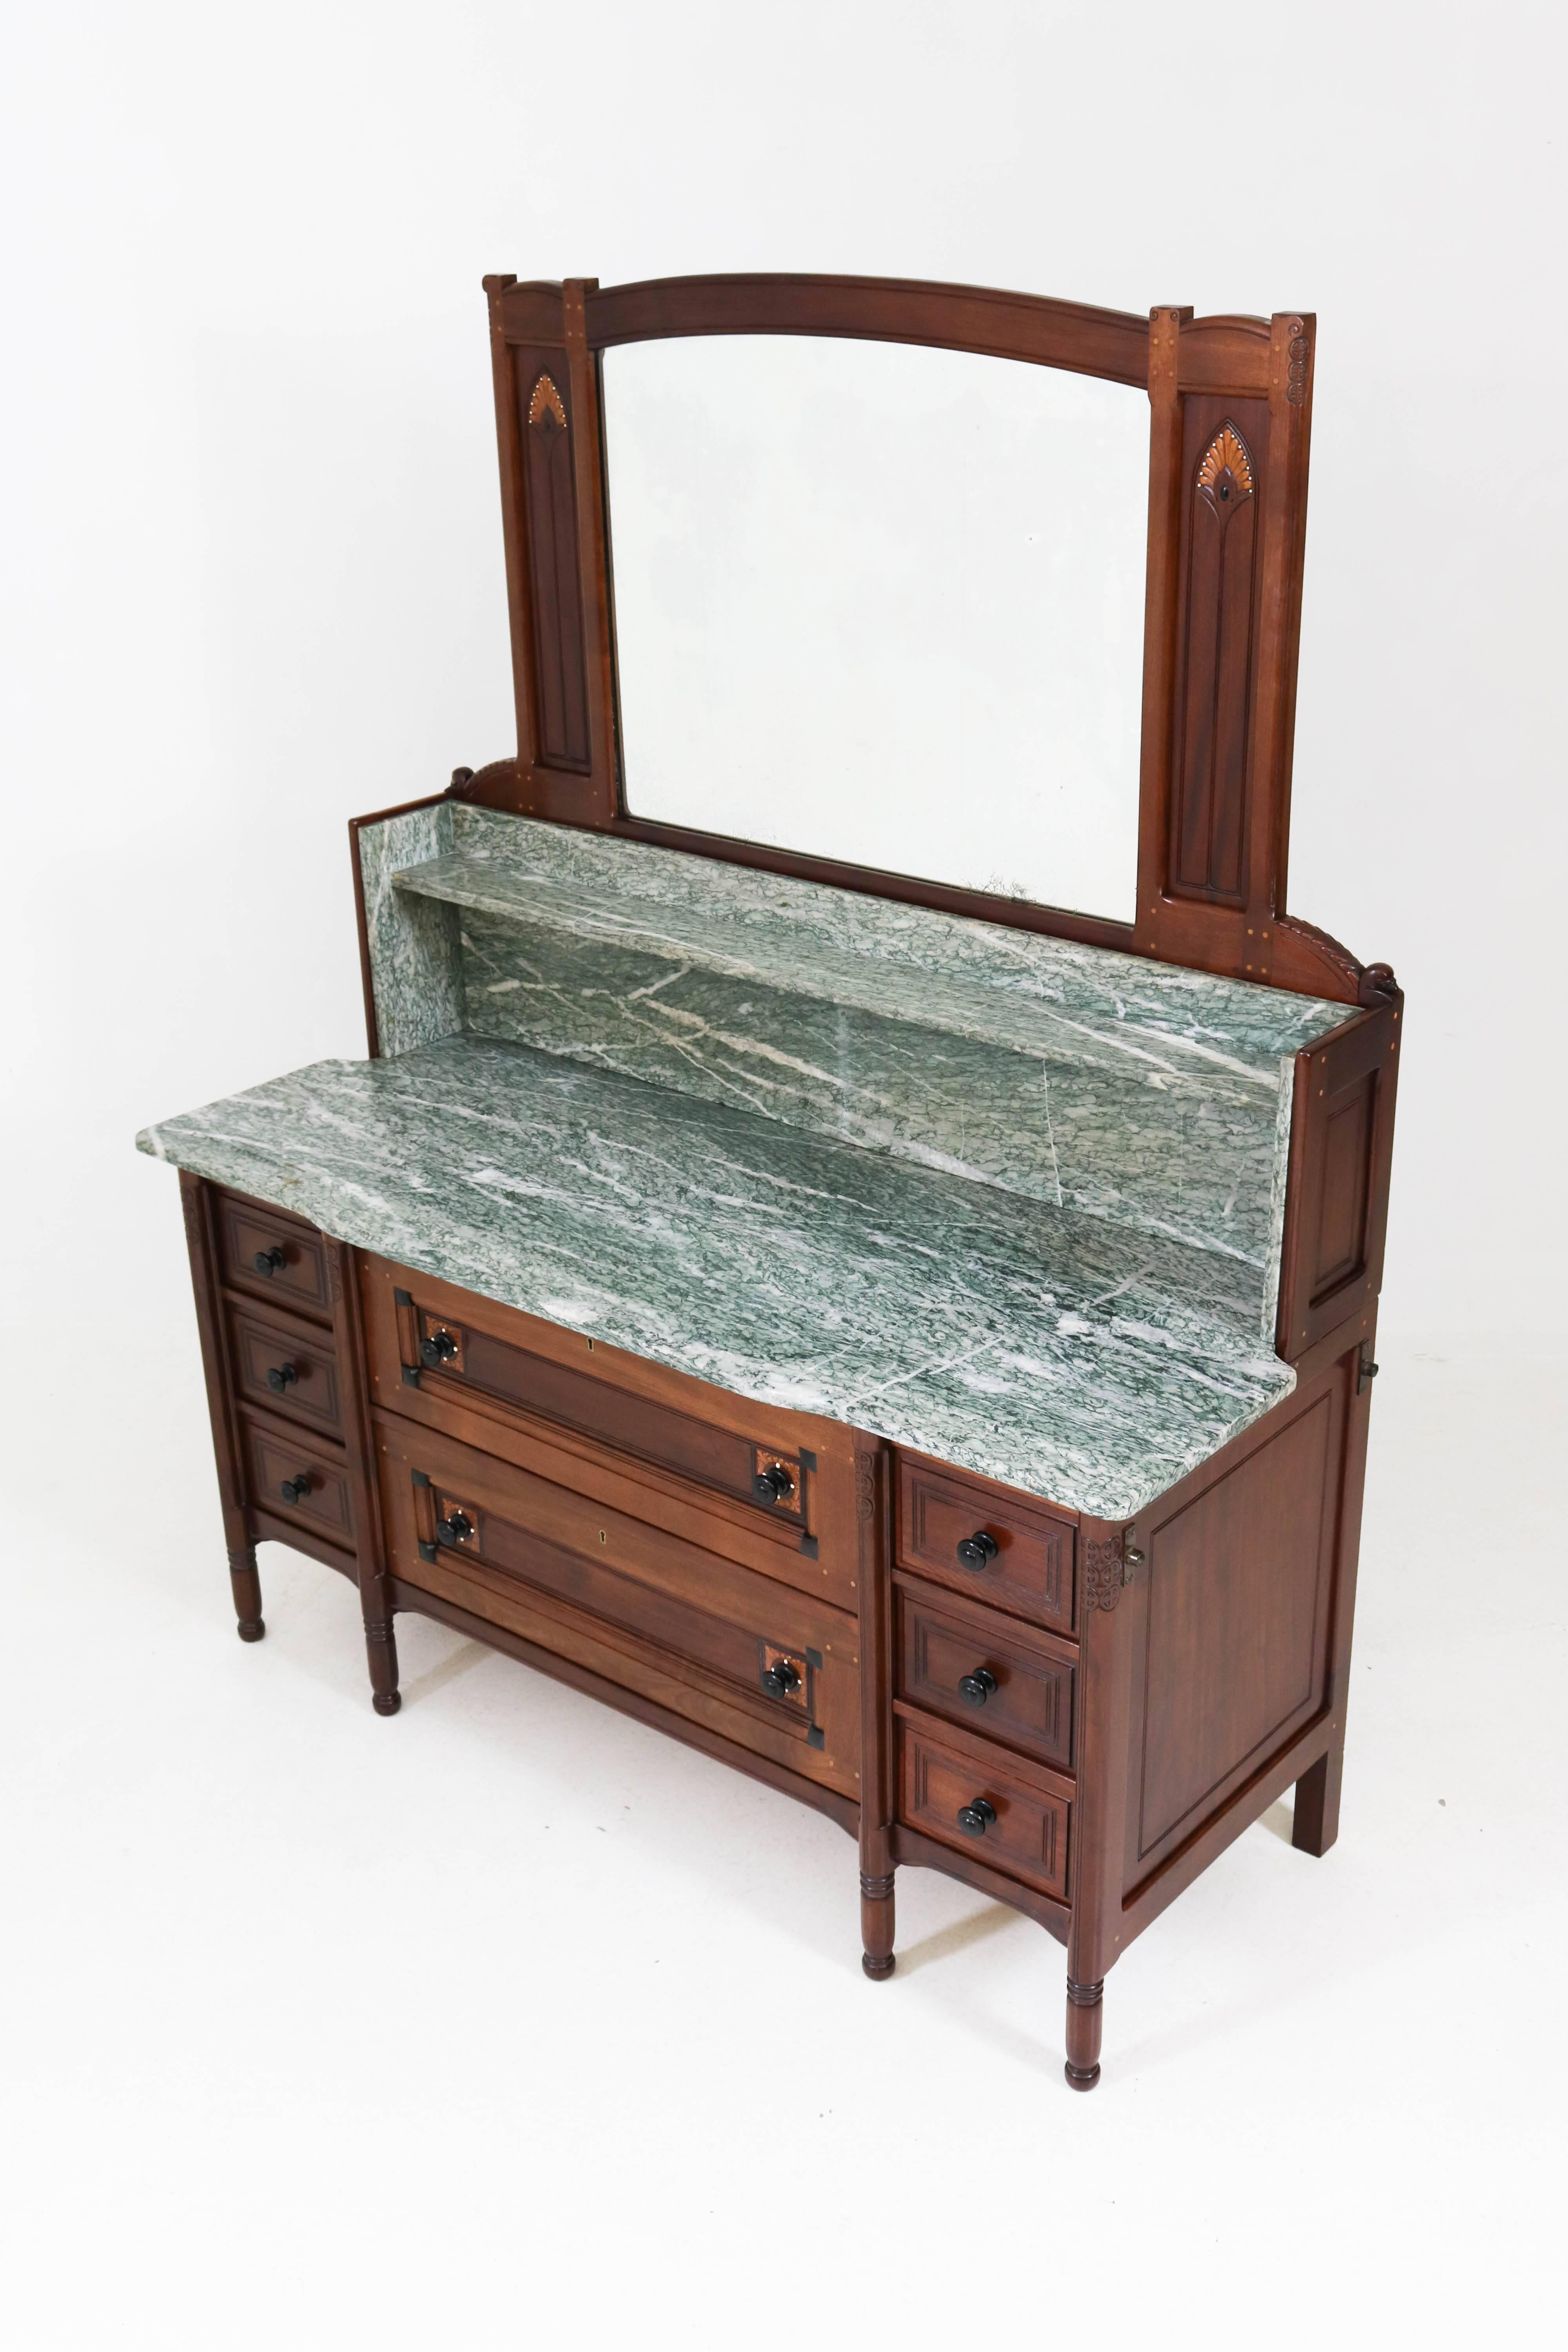 Very rare Arts & Crafts Art Nouveau vanity or dresser by Jac. van den Bosch for 't Binnenhuis Amsterdam, 1900s.
Solid mahogany with Macassar ebony, palmwood and inlay.
Original green marble top.
This wonderful one of a kind piece of furniture was